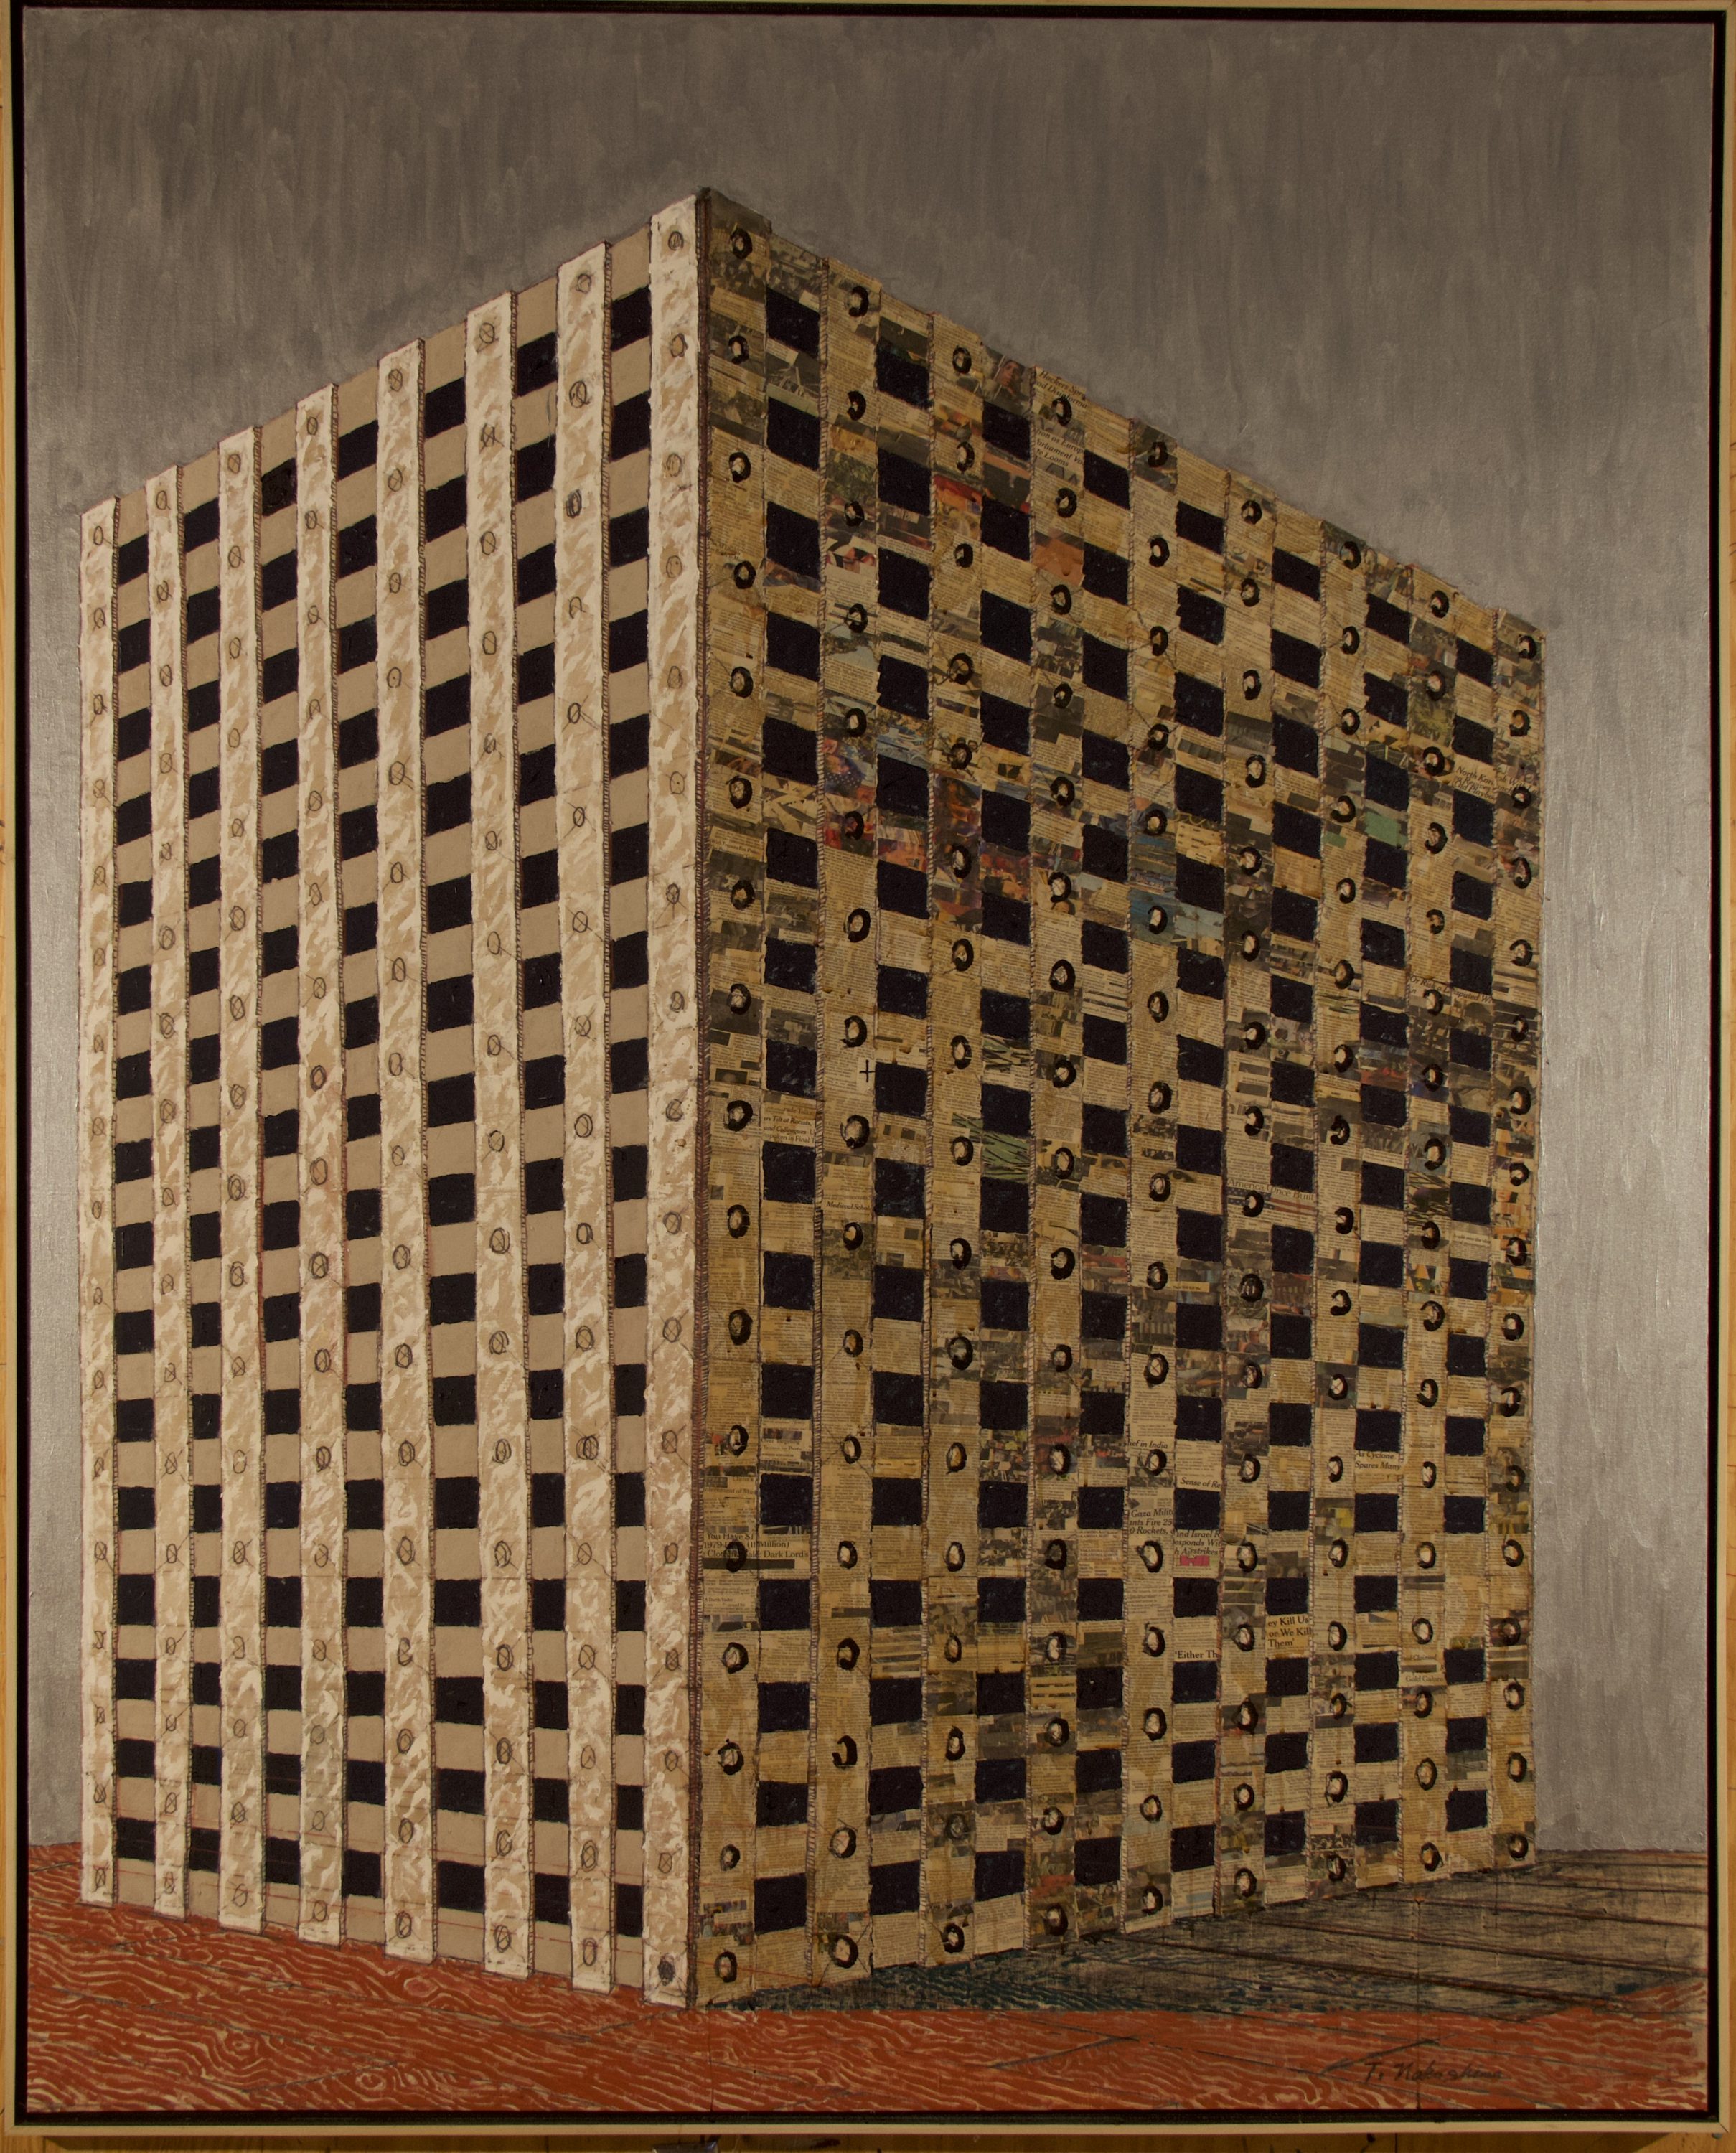 painting of tall jail with many windows in a grid pattern